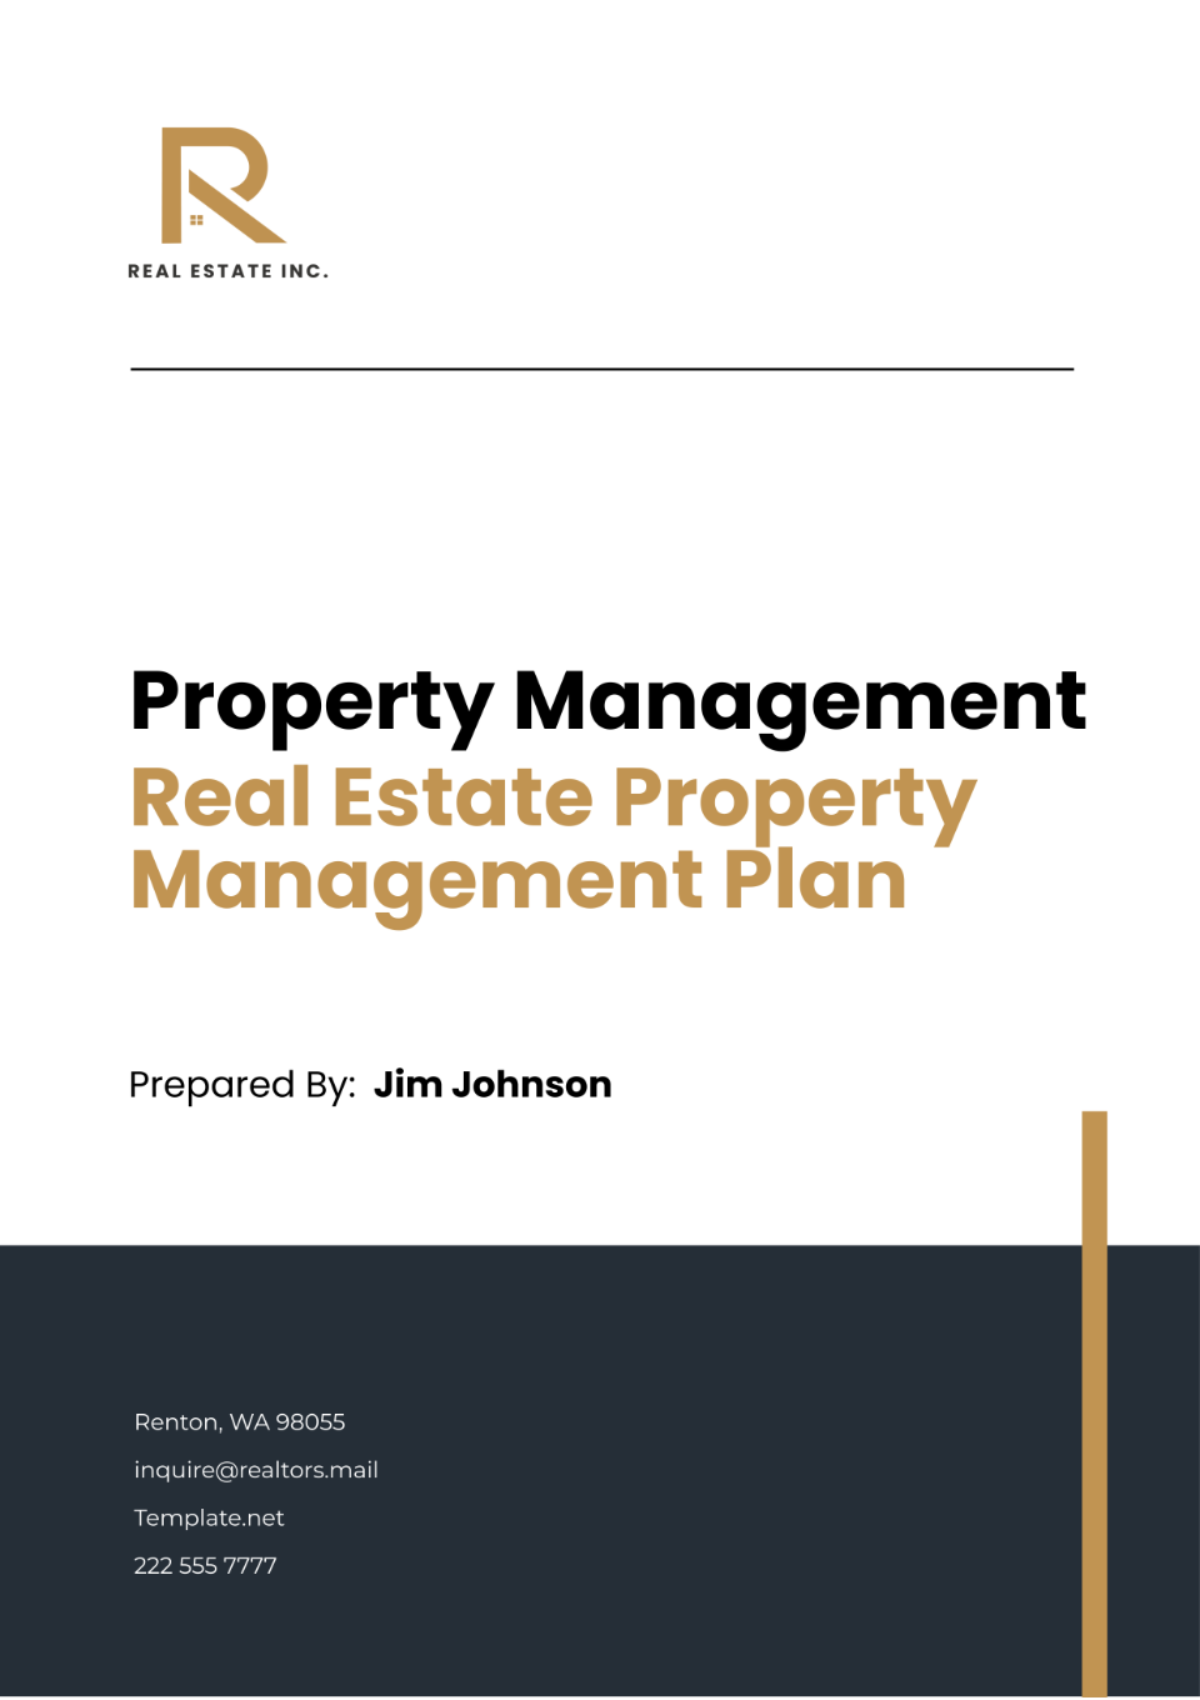 Free Real Estate Property Management Plan Template